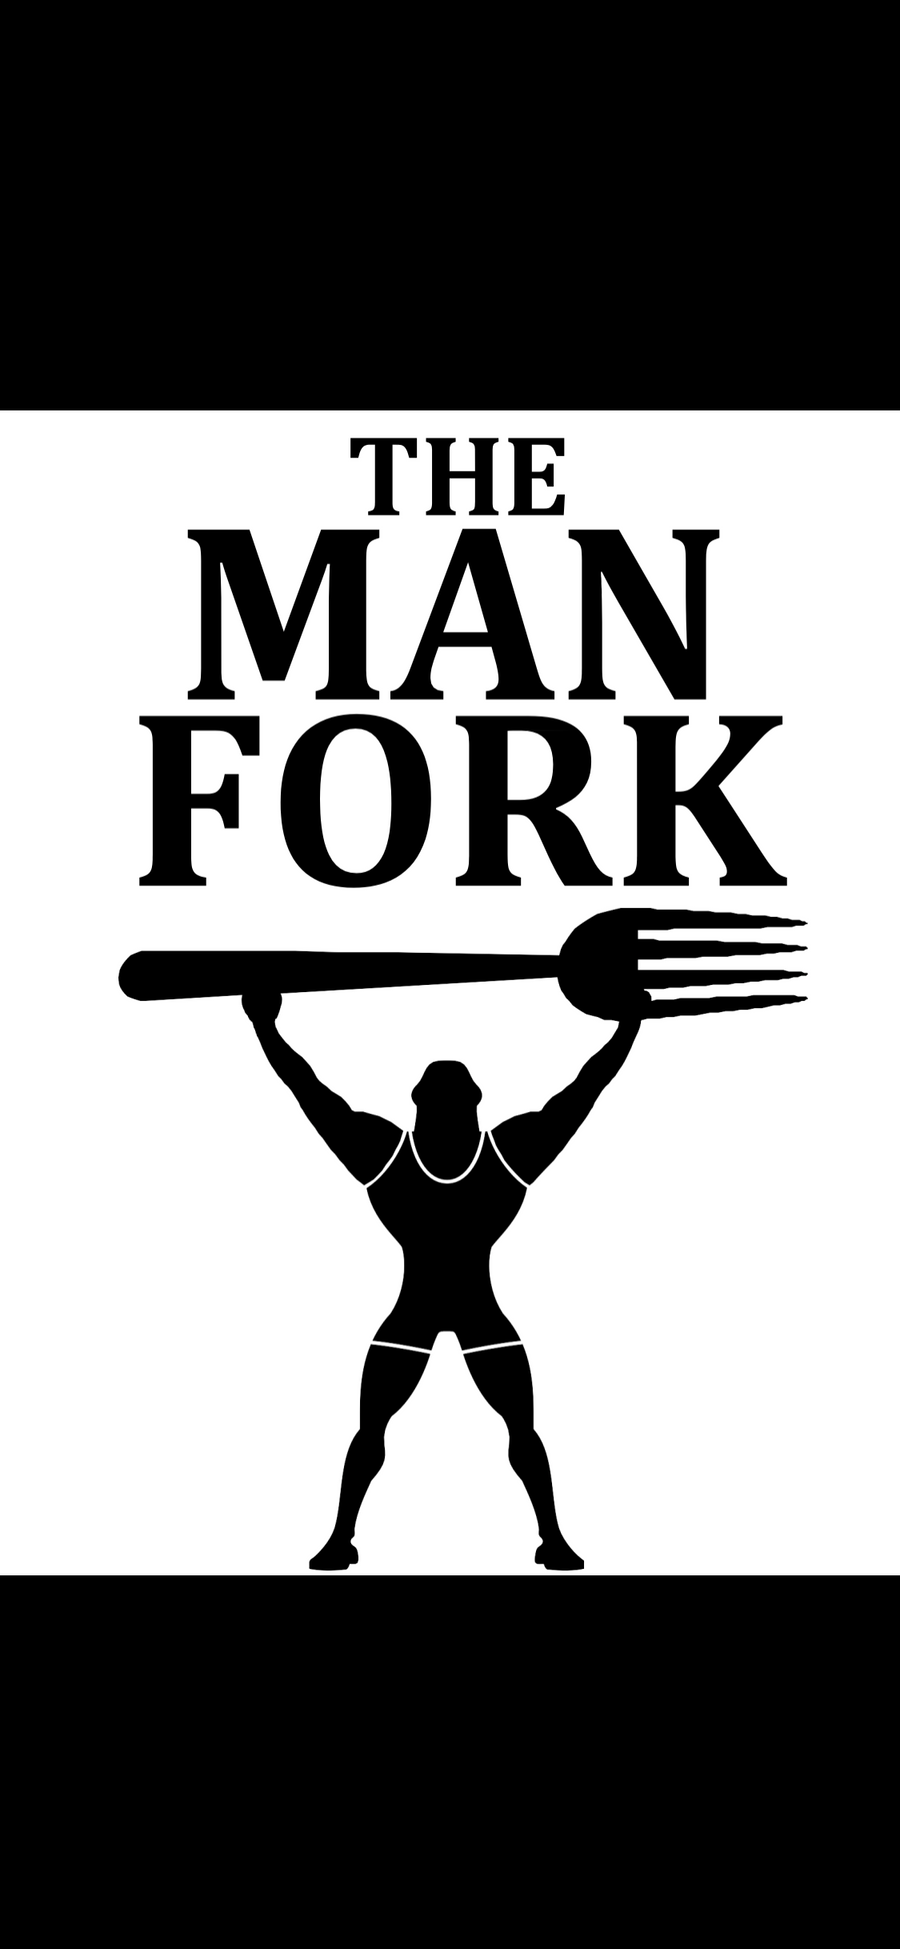 The Wolfpack (4 Man Forks)